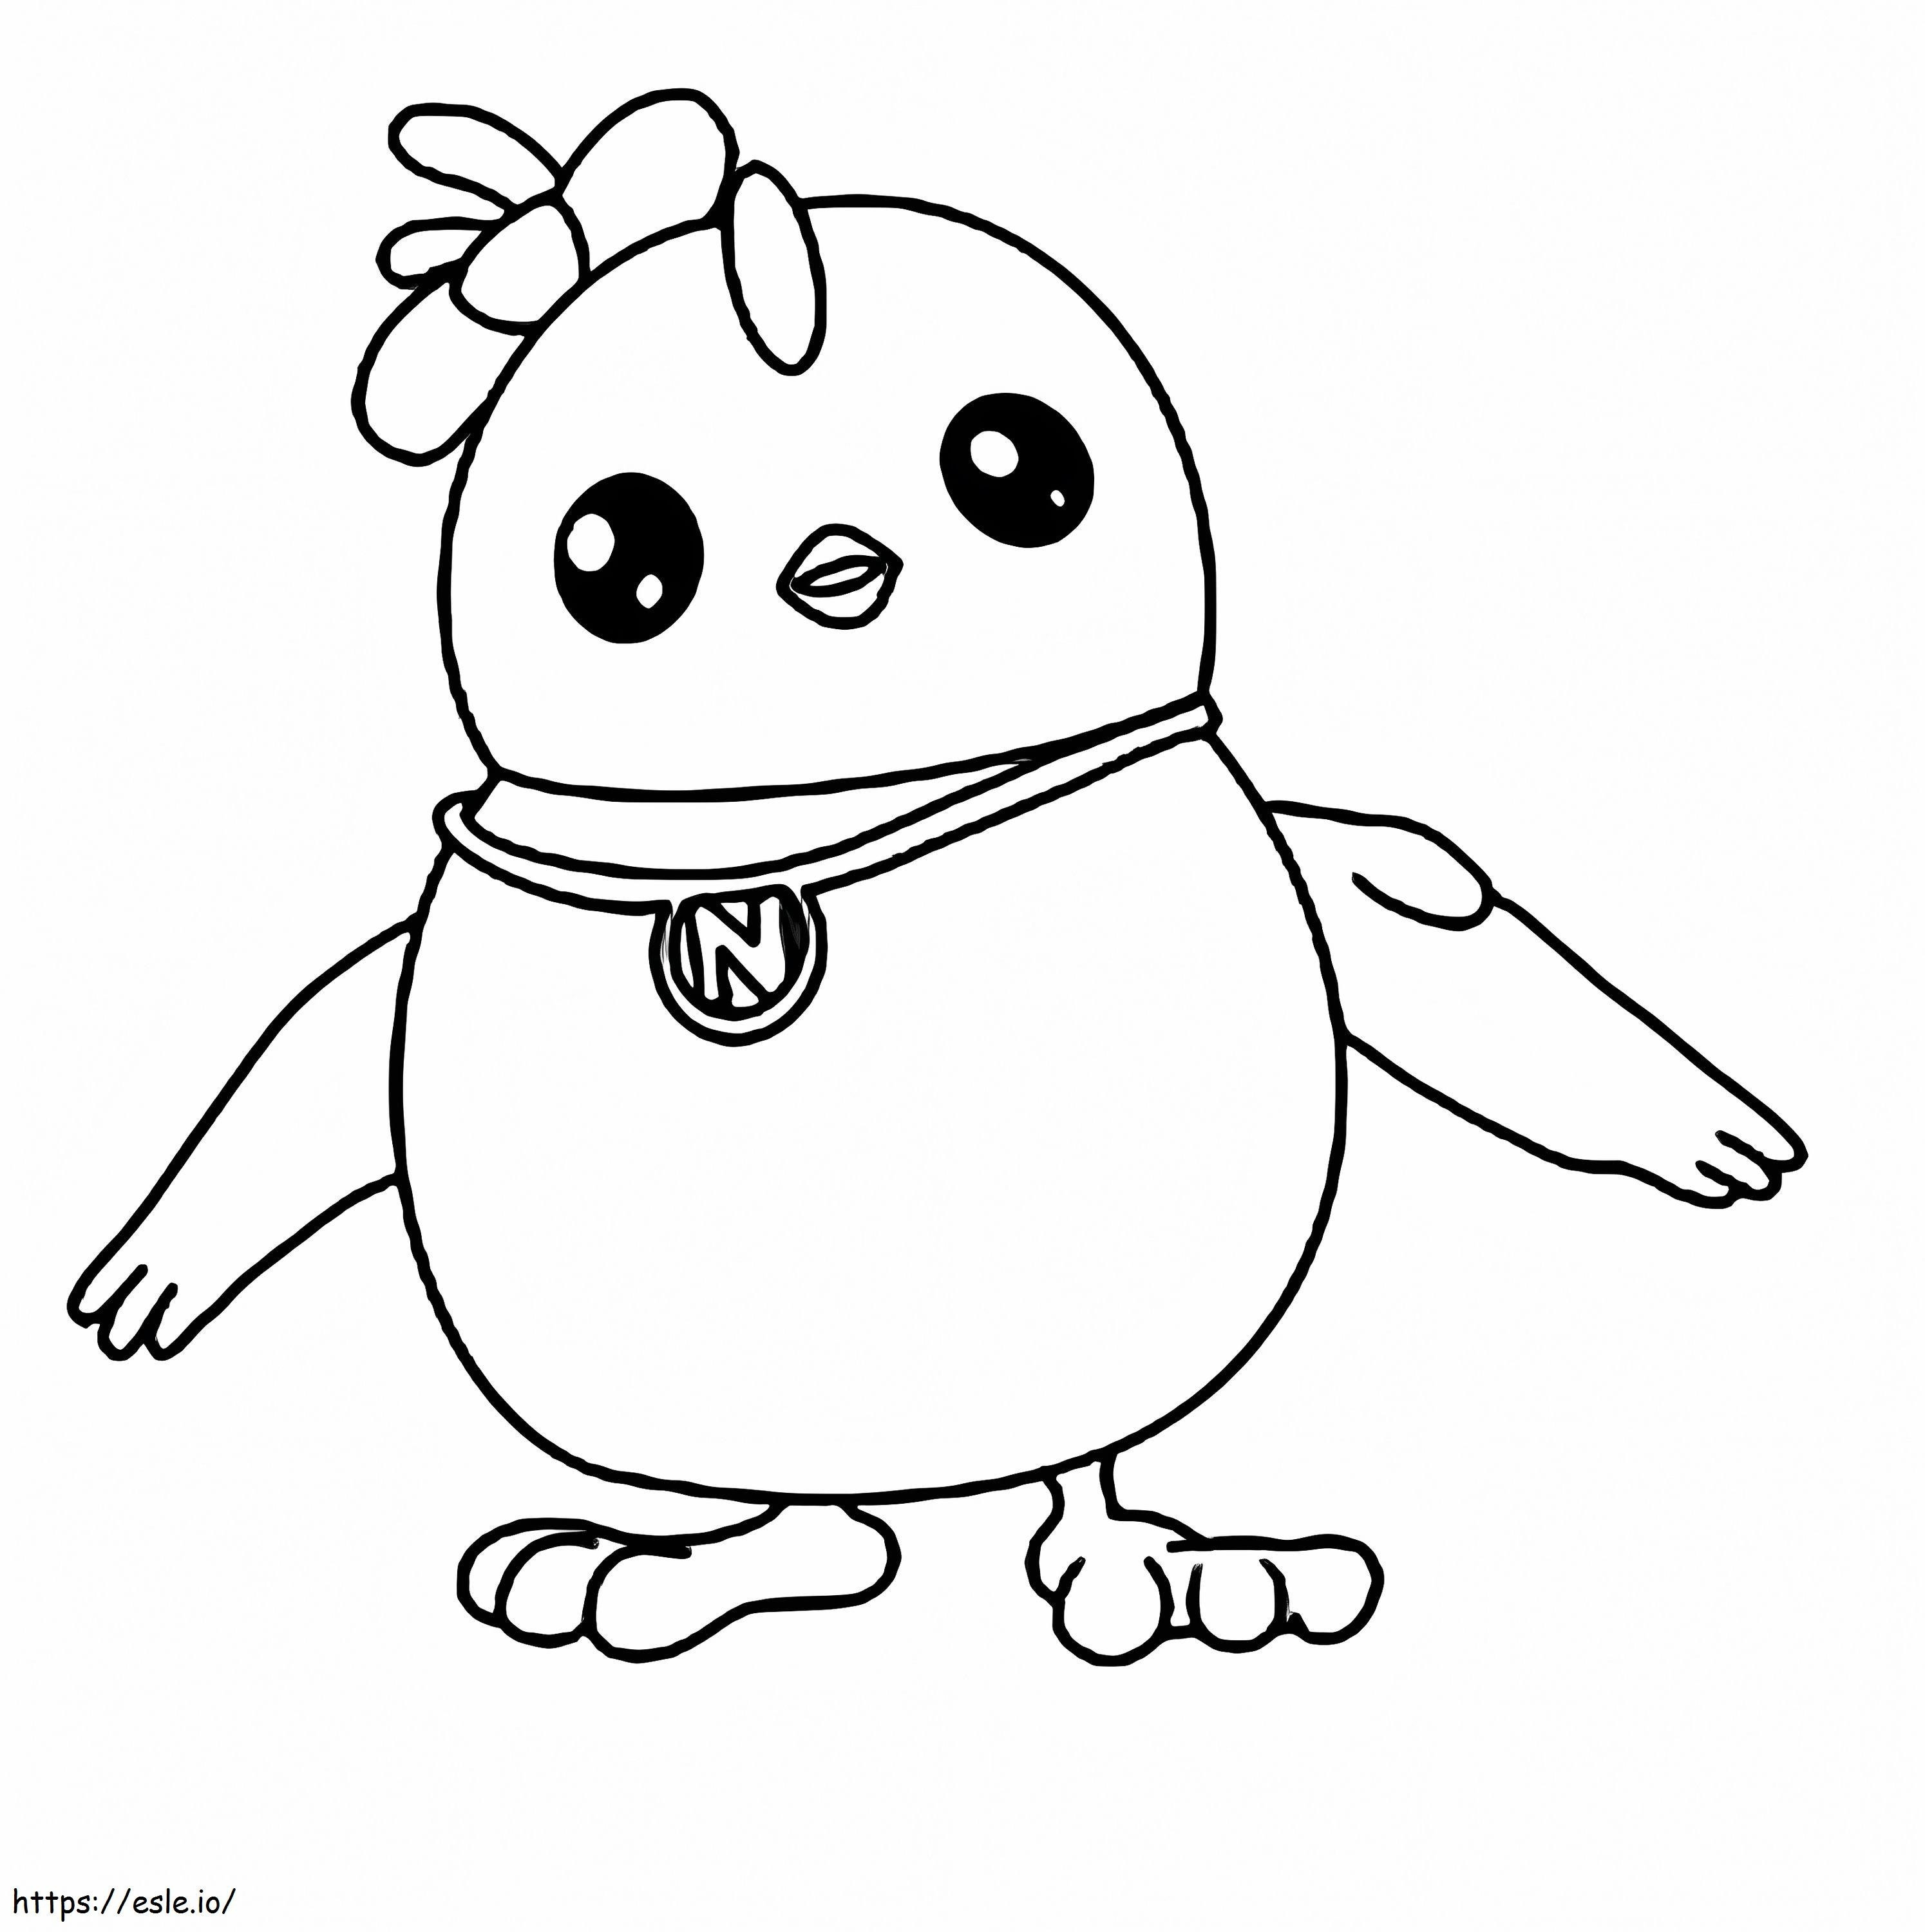 Nana From Didi Friends coloring page